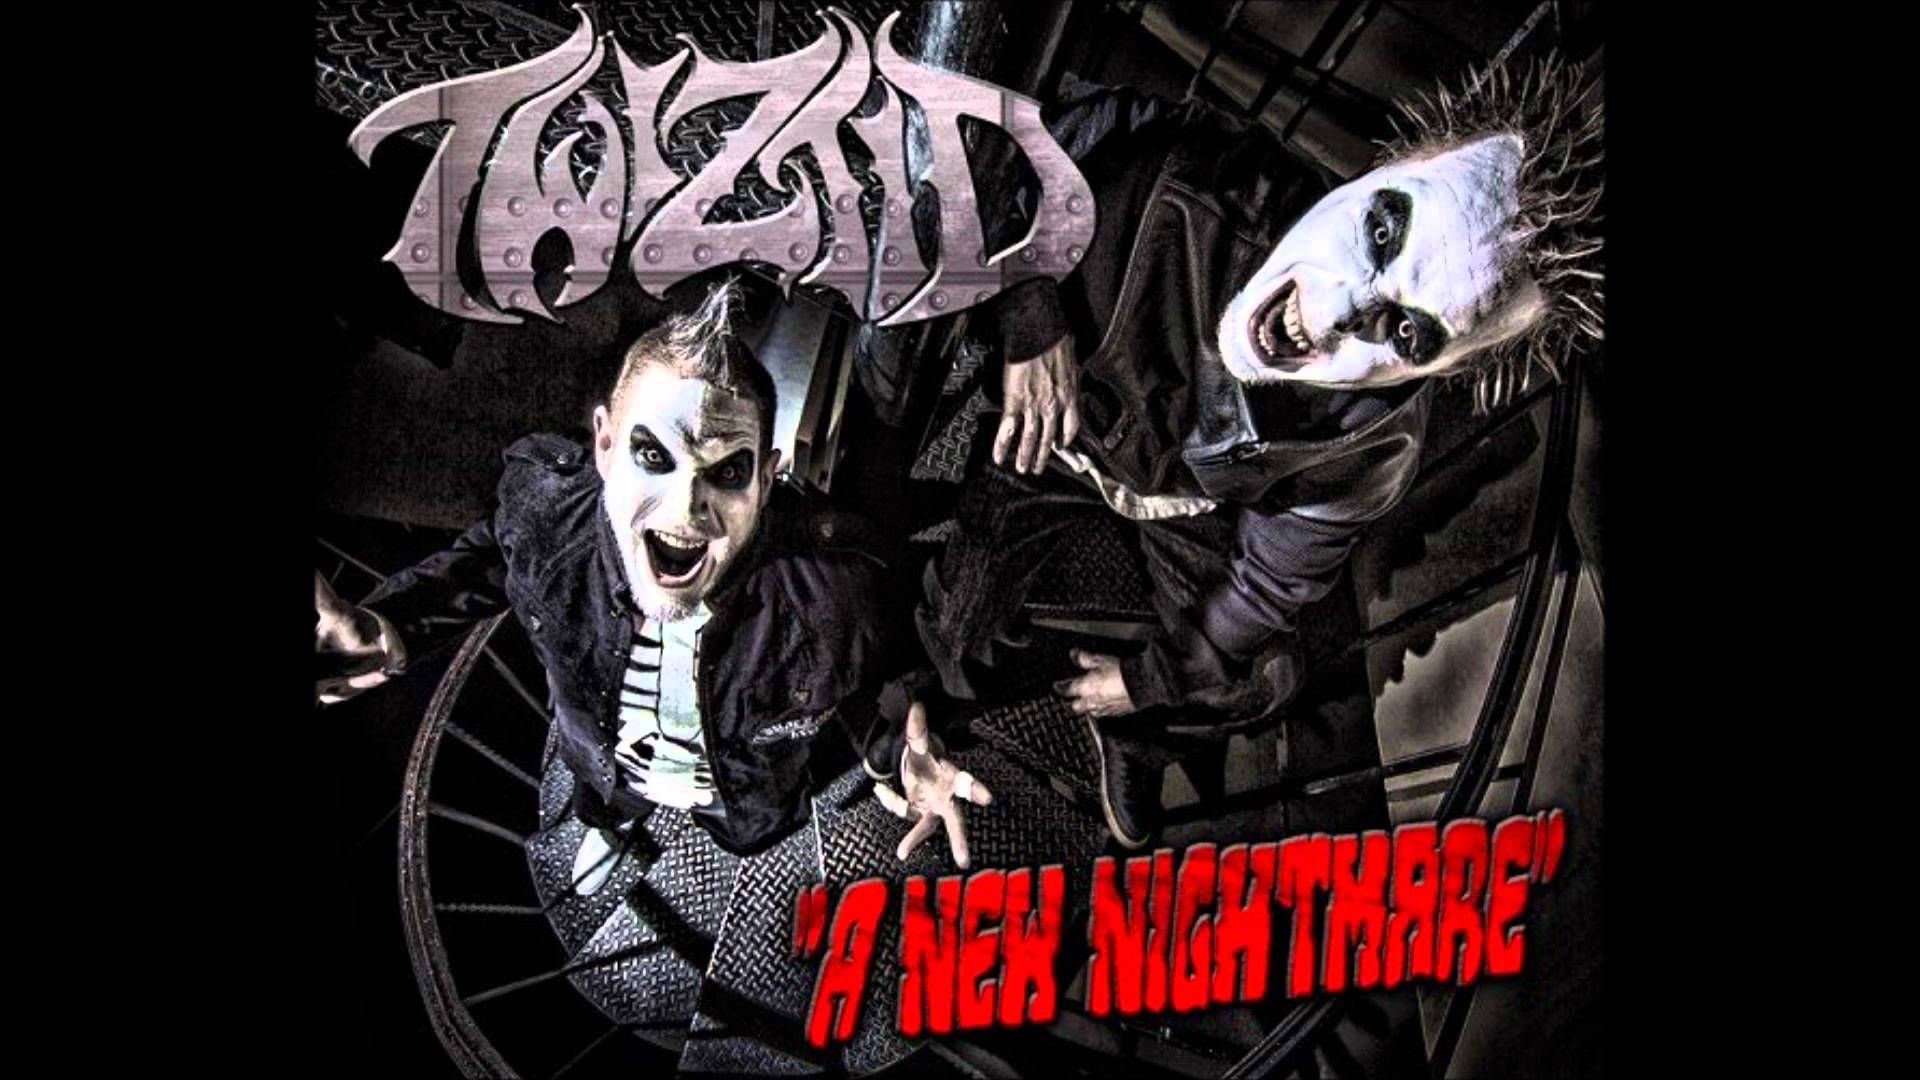 1920x1080 twiztid a new nightmare | Twiztid - Wasted - YouTube